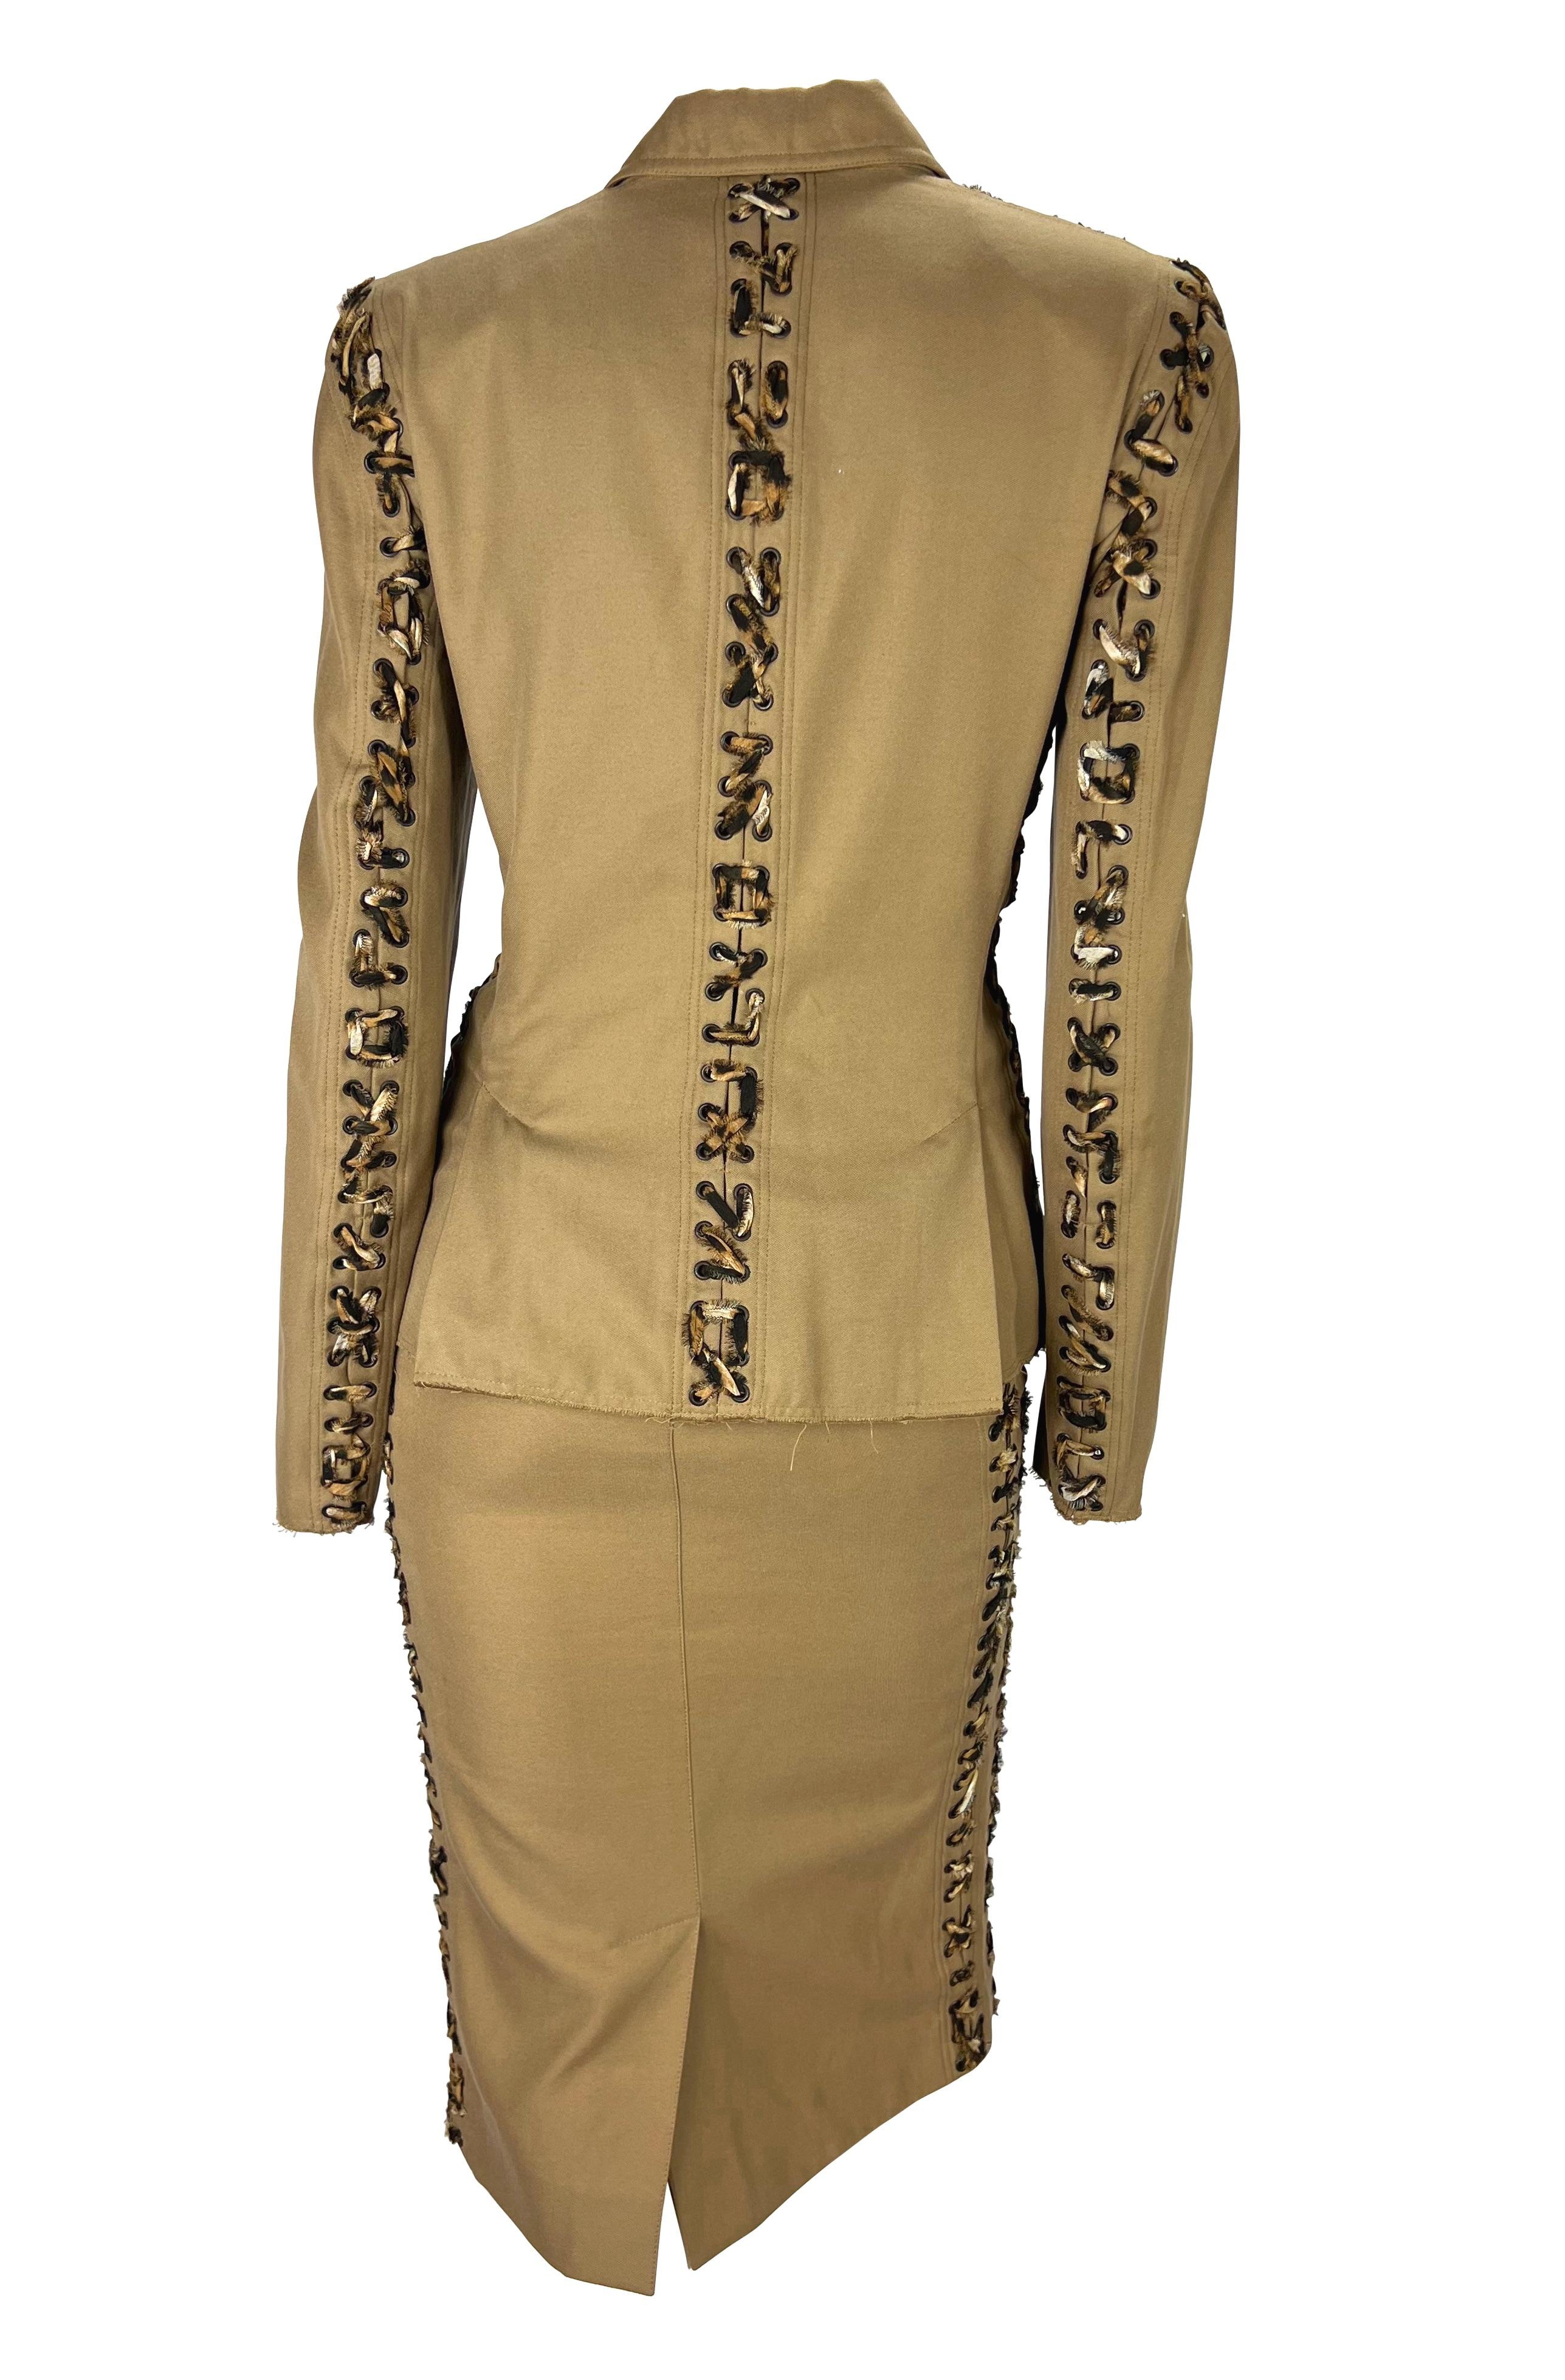 S/S 2002 Yves Saint Laurent by Tom Ford Safari Cheetah Print Lace-Up Khaki Suit In Excellent Condition For Sale In West Hollywood, CA